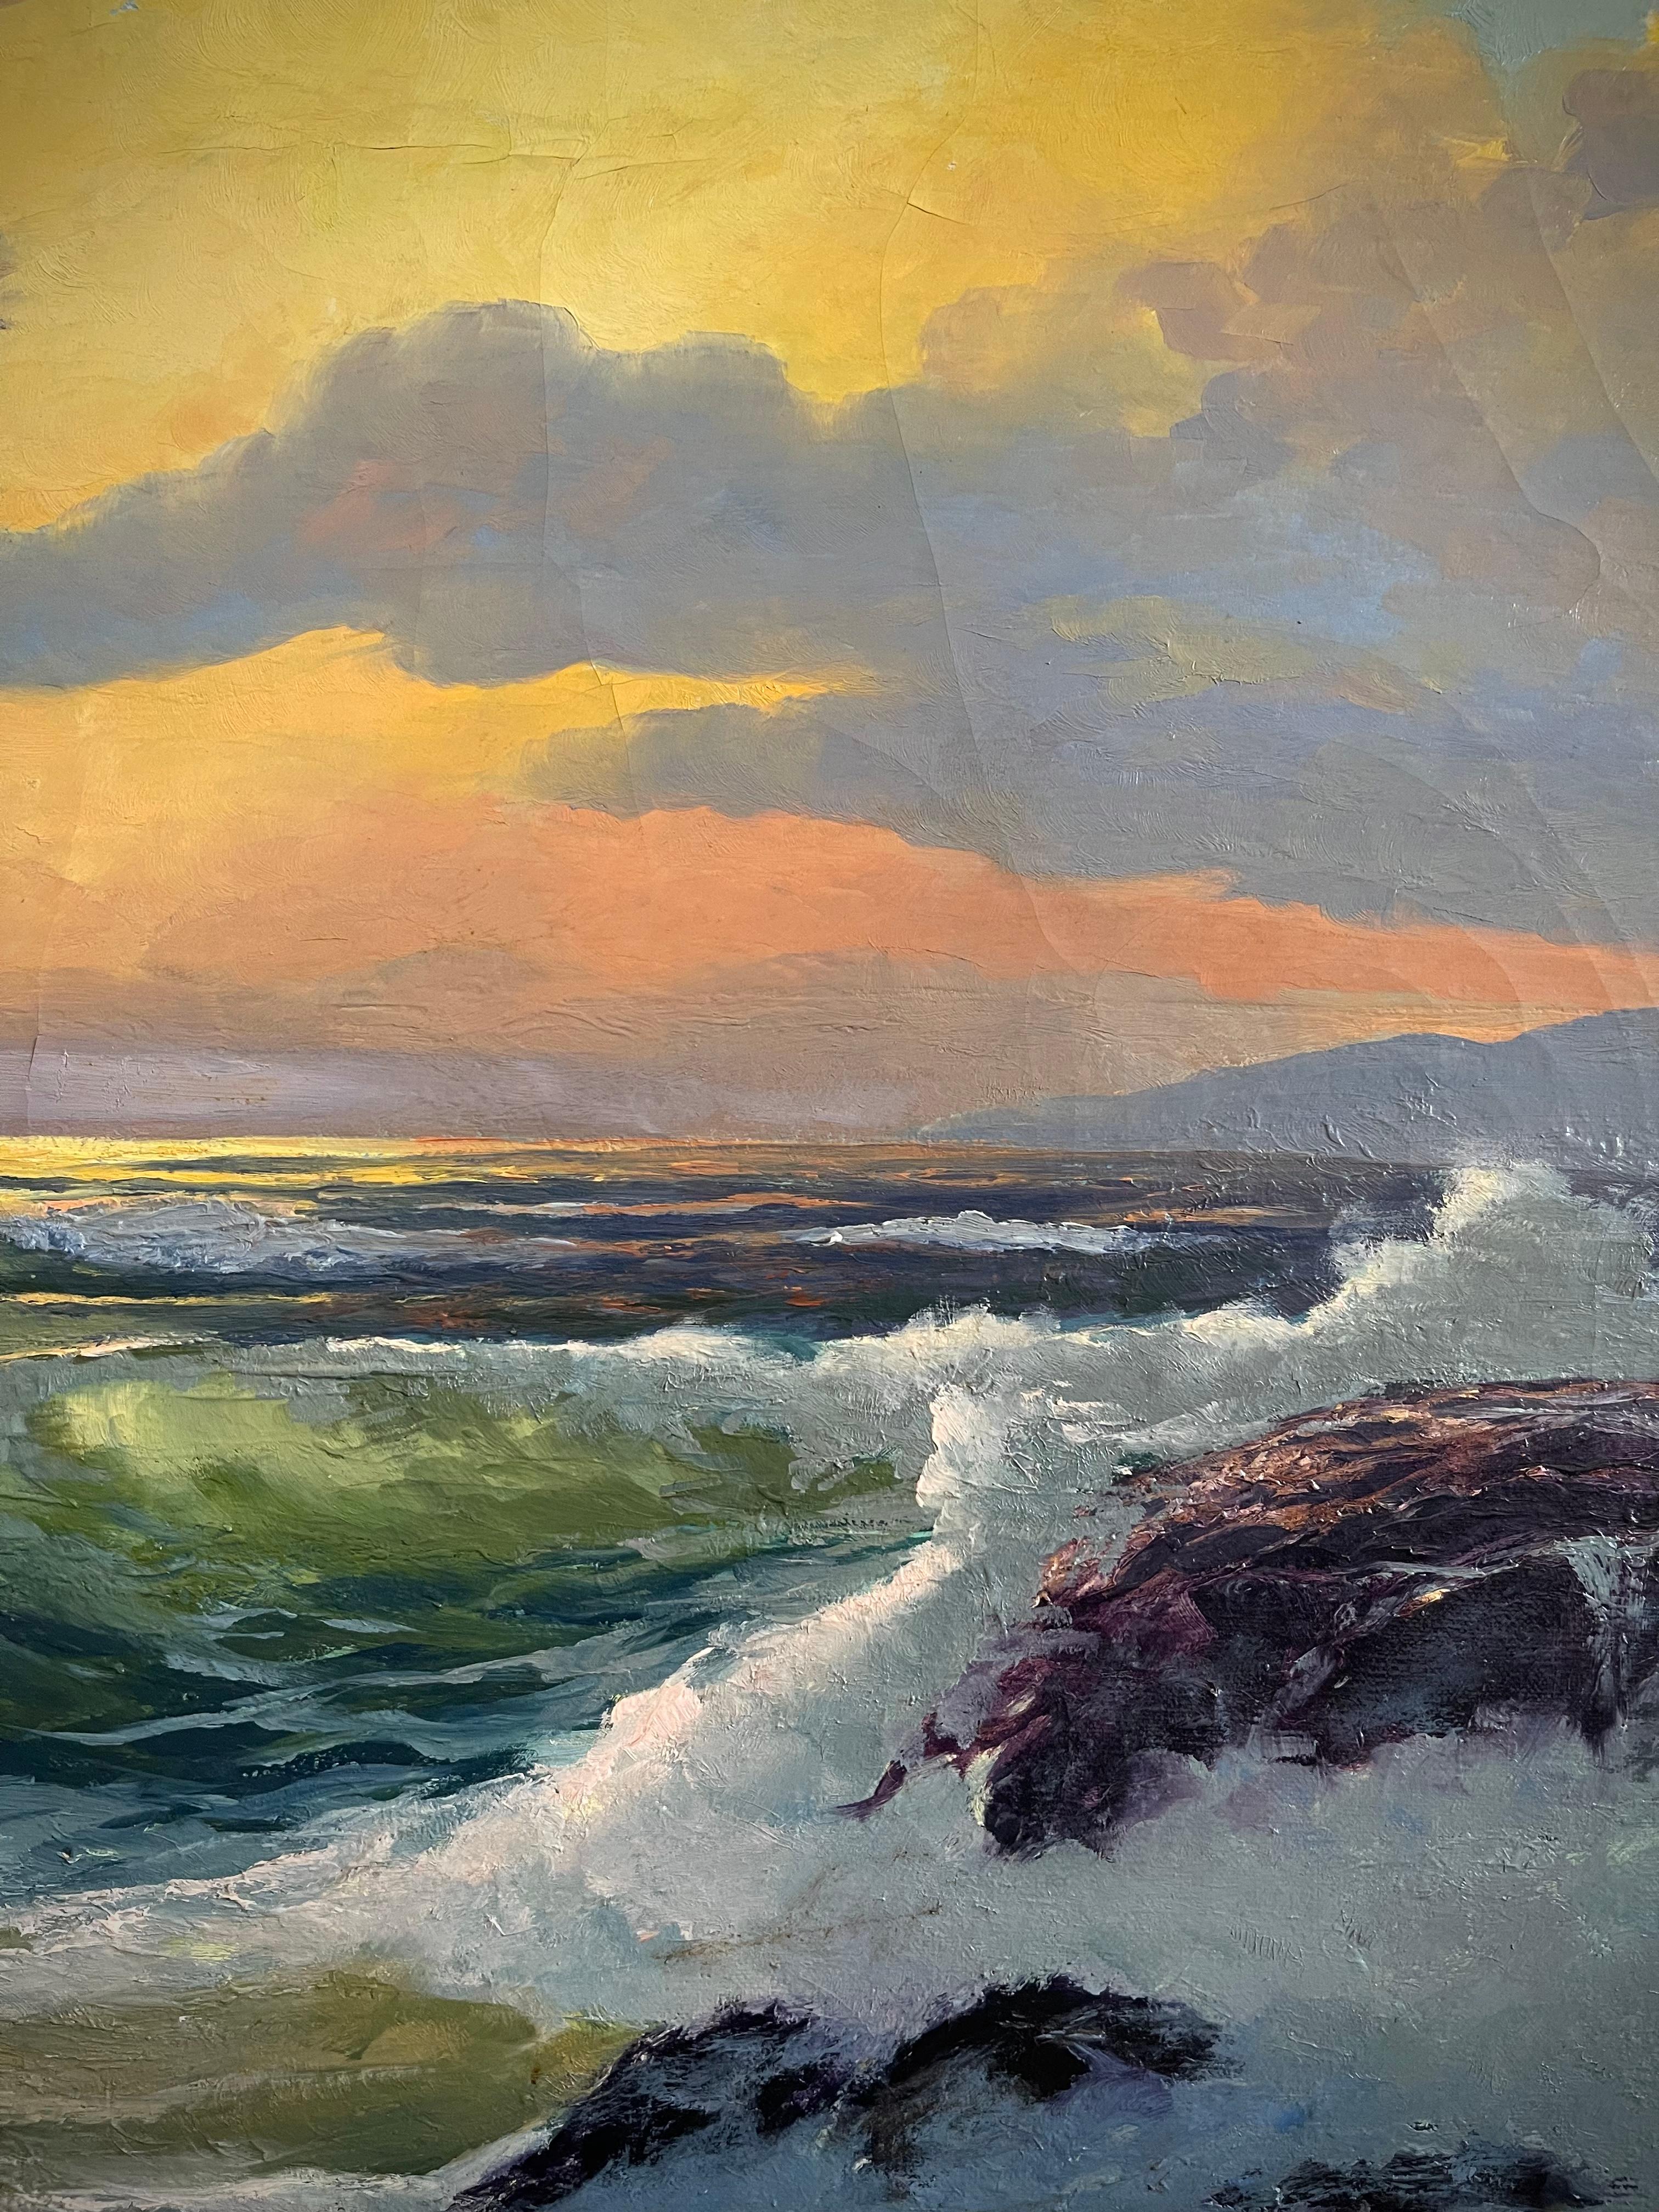 Brushed Crashing Waves Vintage Nautical Oil on Canvas Painting signed by August Holland For Sale